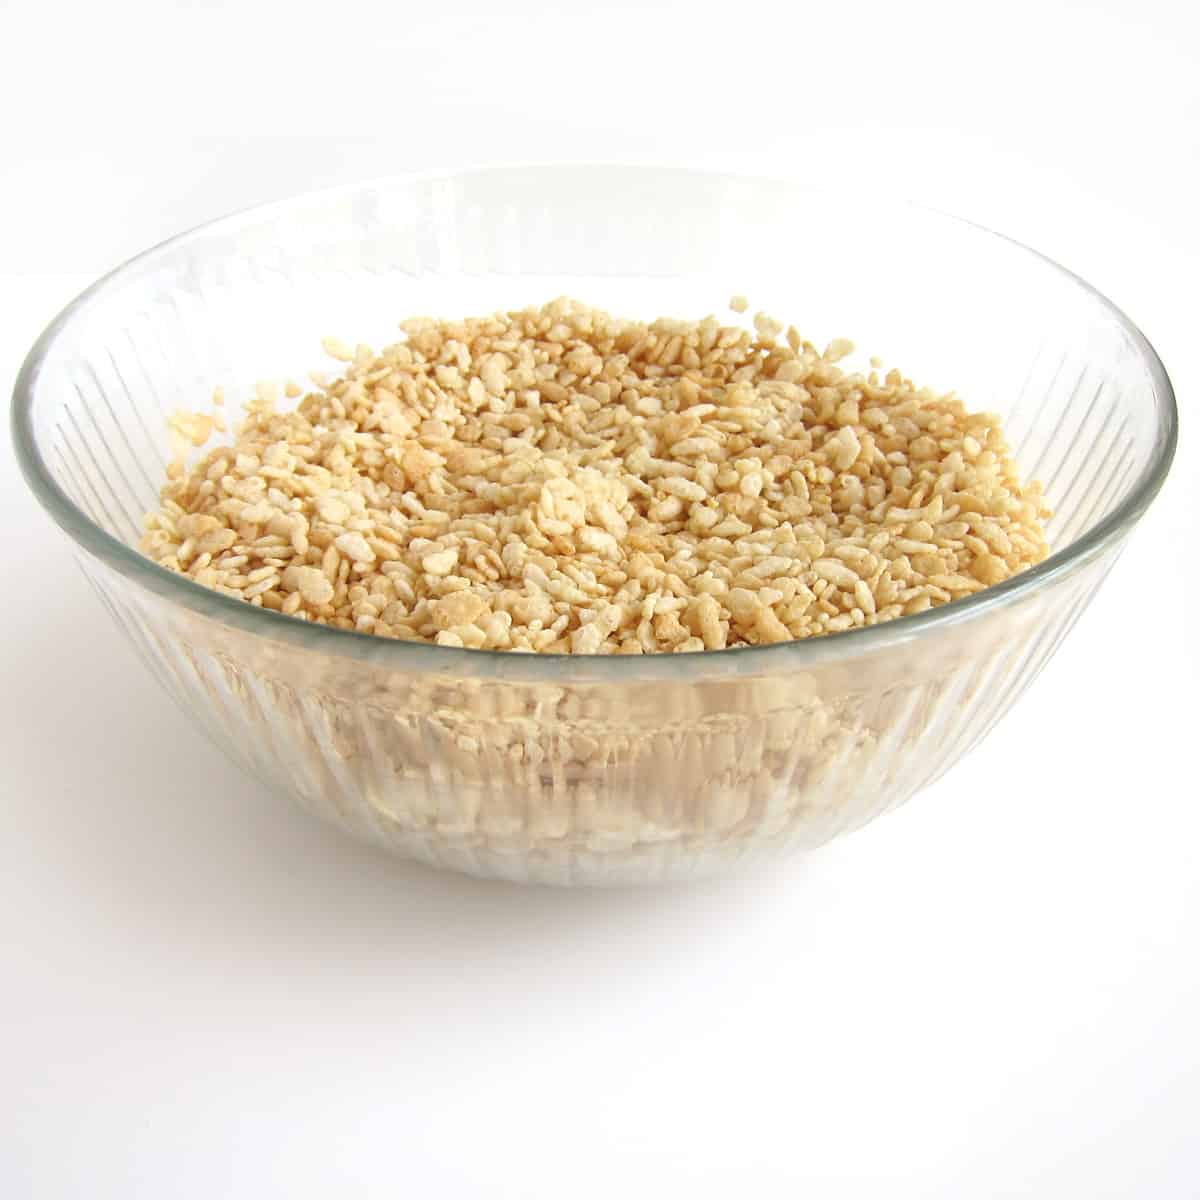 A big bowl of Rice Krispies Cereal.